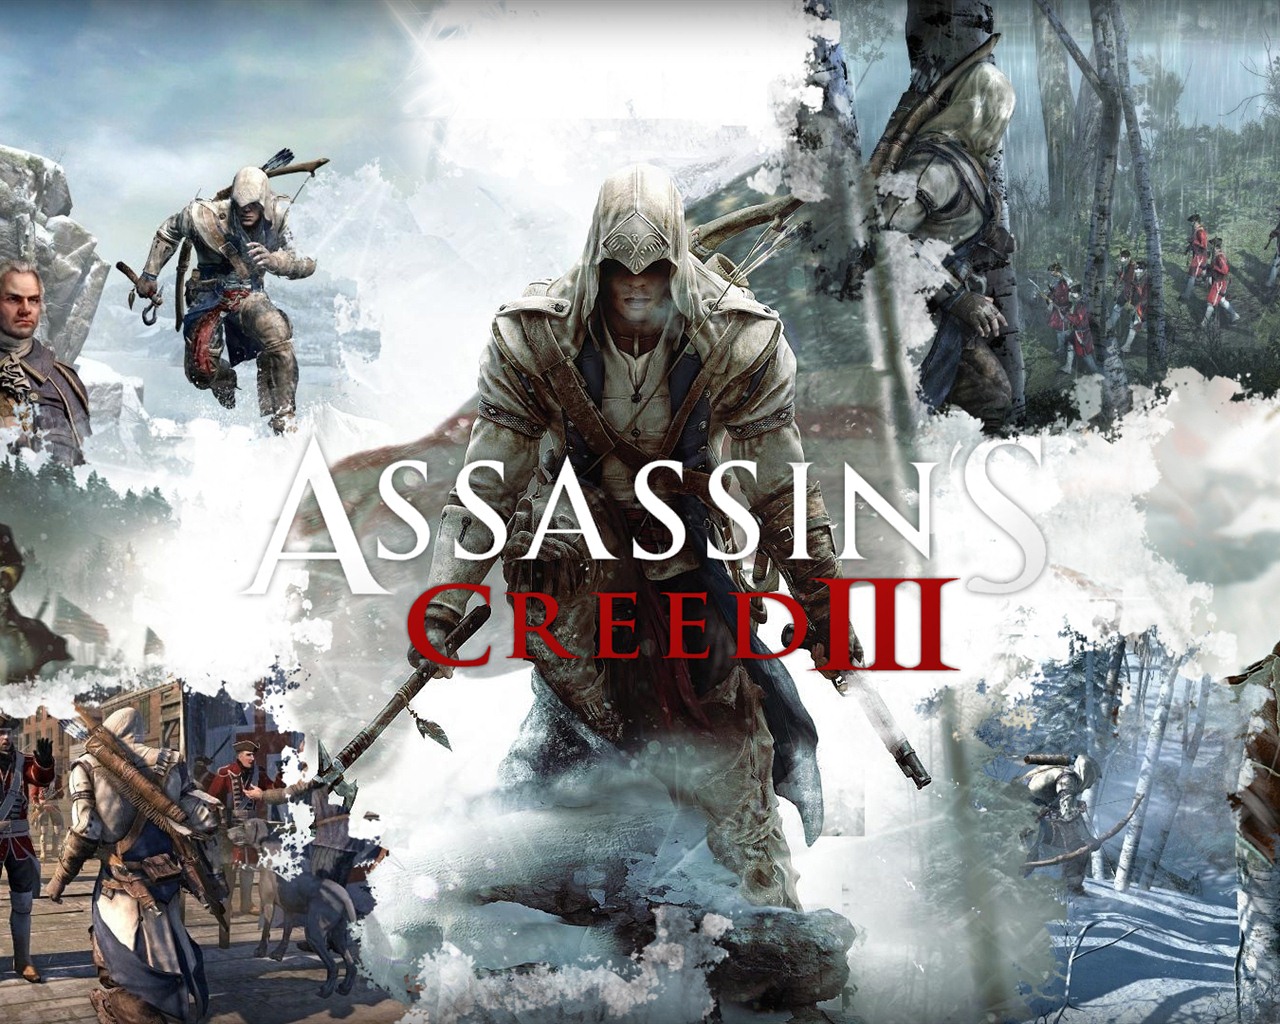 Assassin's Creed 3 HD wallpapers #14 - 1280x1024